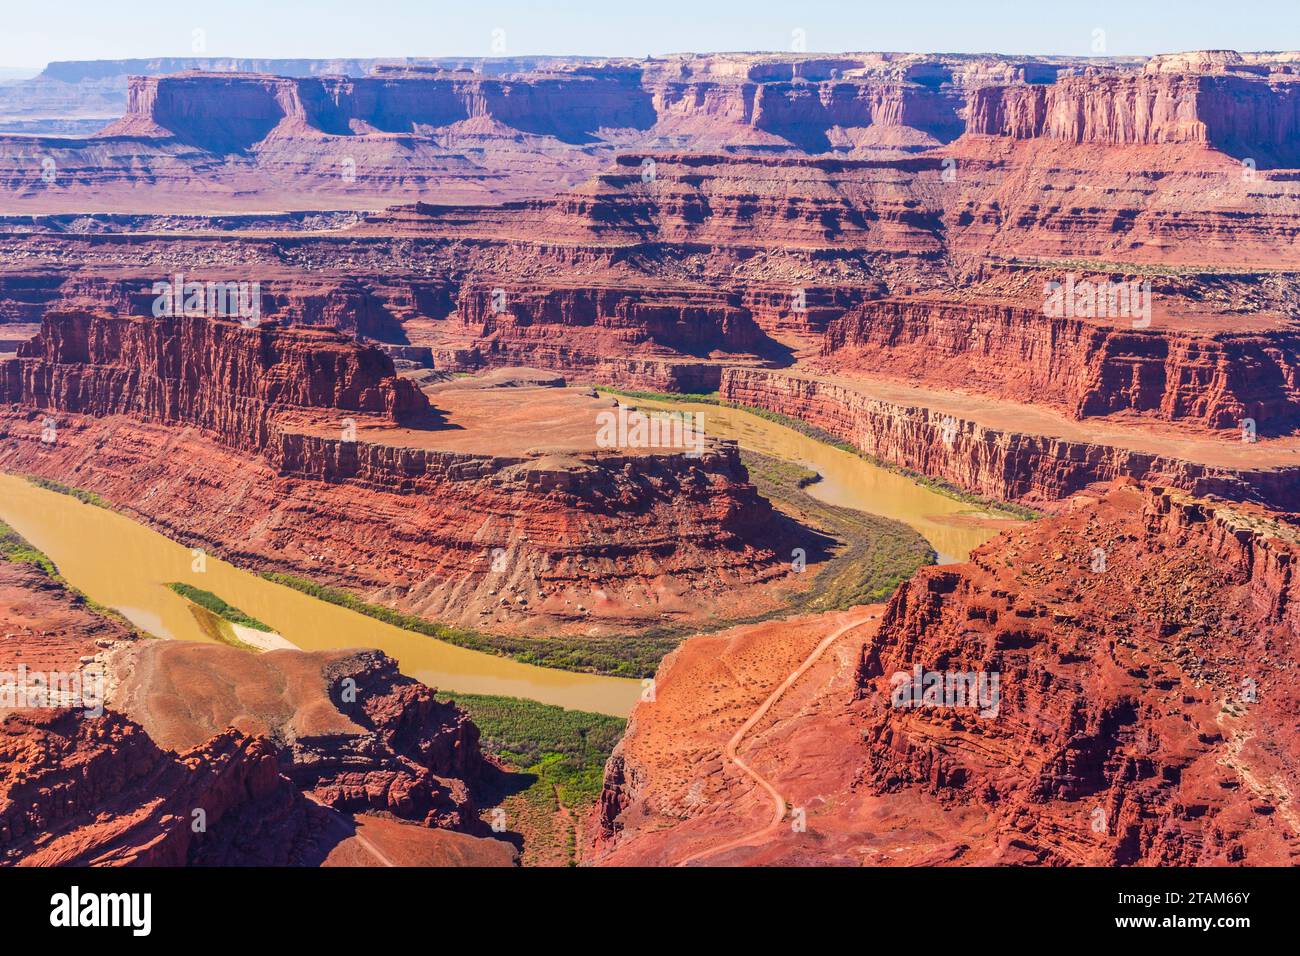 Dead Horse Point State Park in Utah overlooks the Colorado 2000 feet below with its carved canyon and amazing geologic formations and the pinnacles. Stock Photo